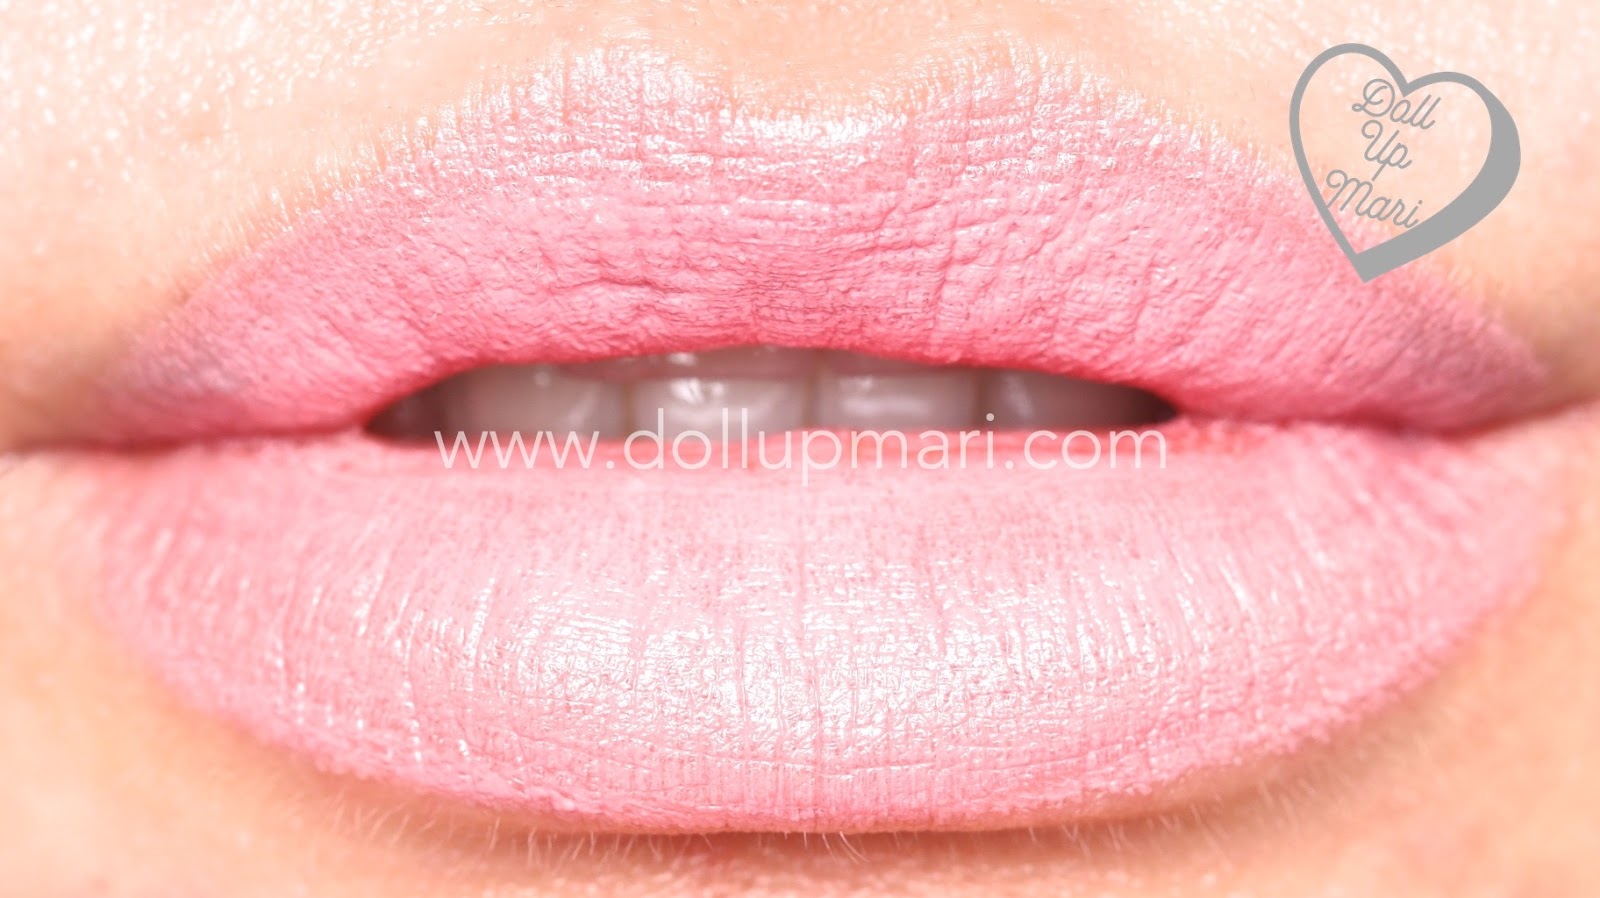 lip swatch of Pink Passion shade of AVON Perfectly Matte Lipstick